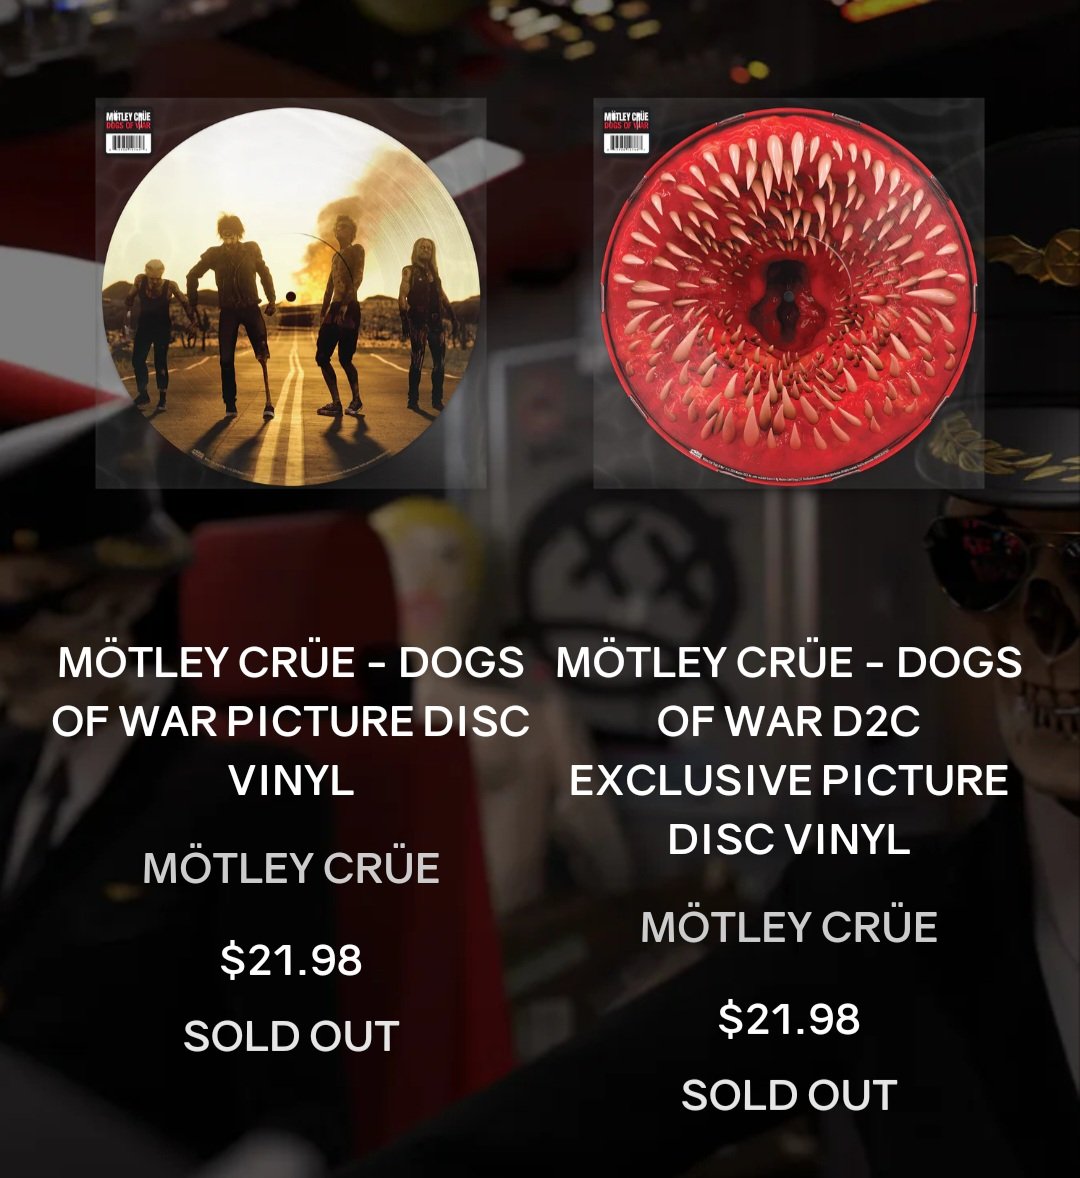 Both @MotleyCrue picture discs sold out in 1 hour of going on sale...for a song no one has heard yet!